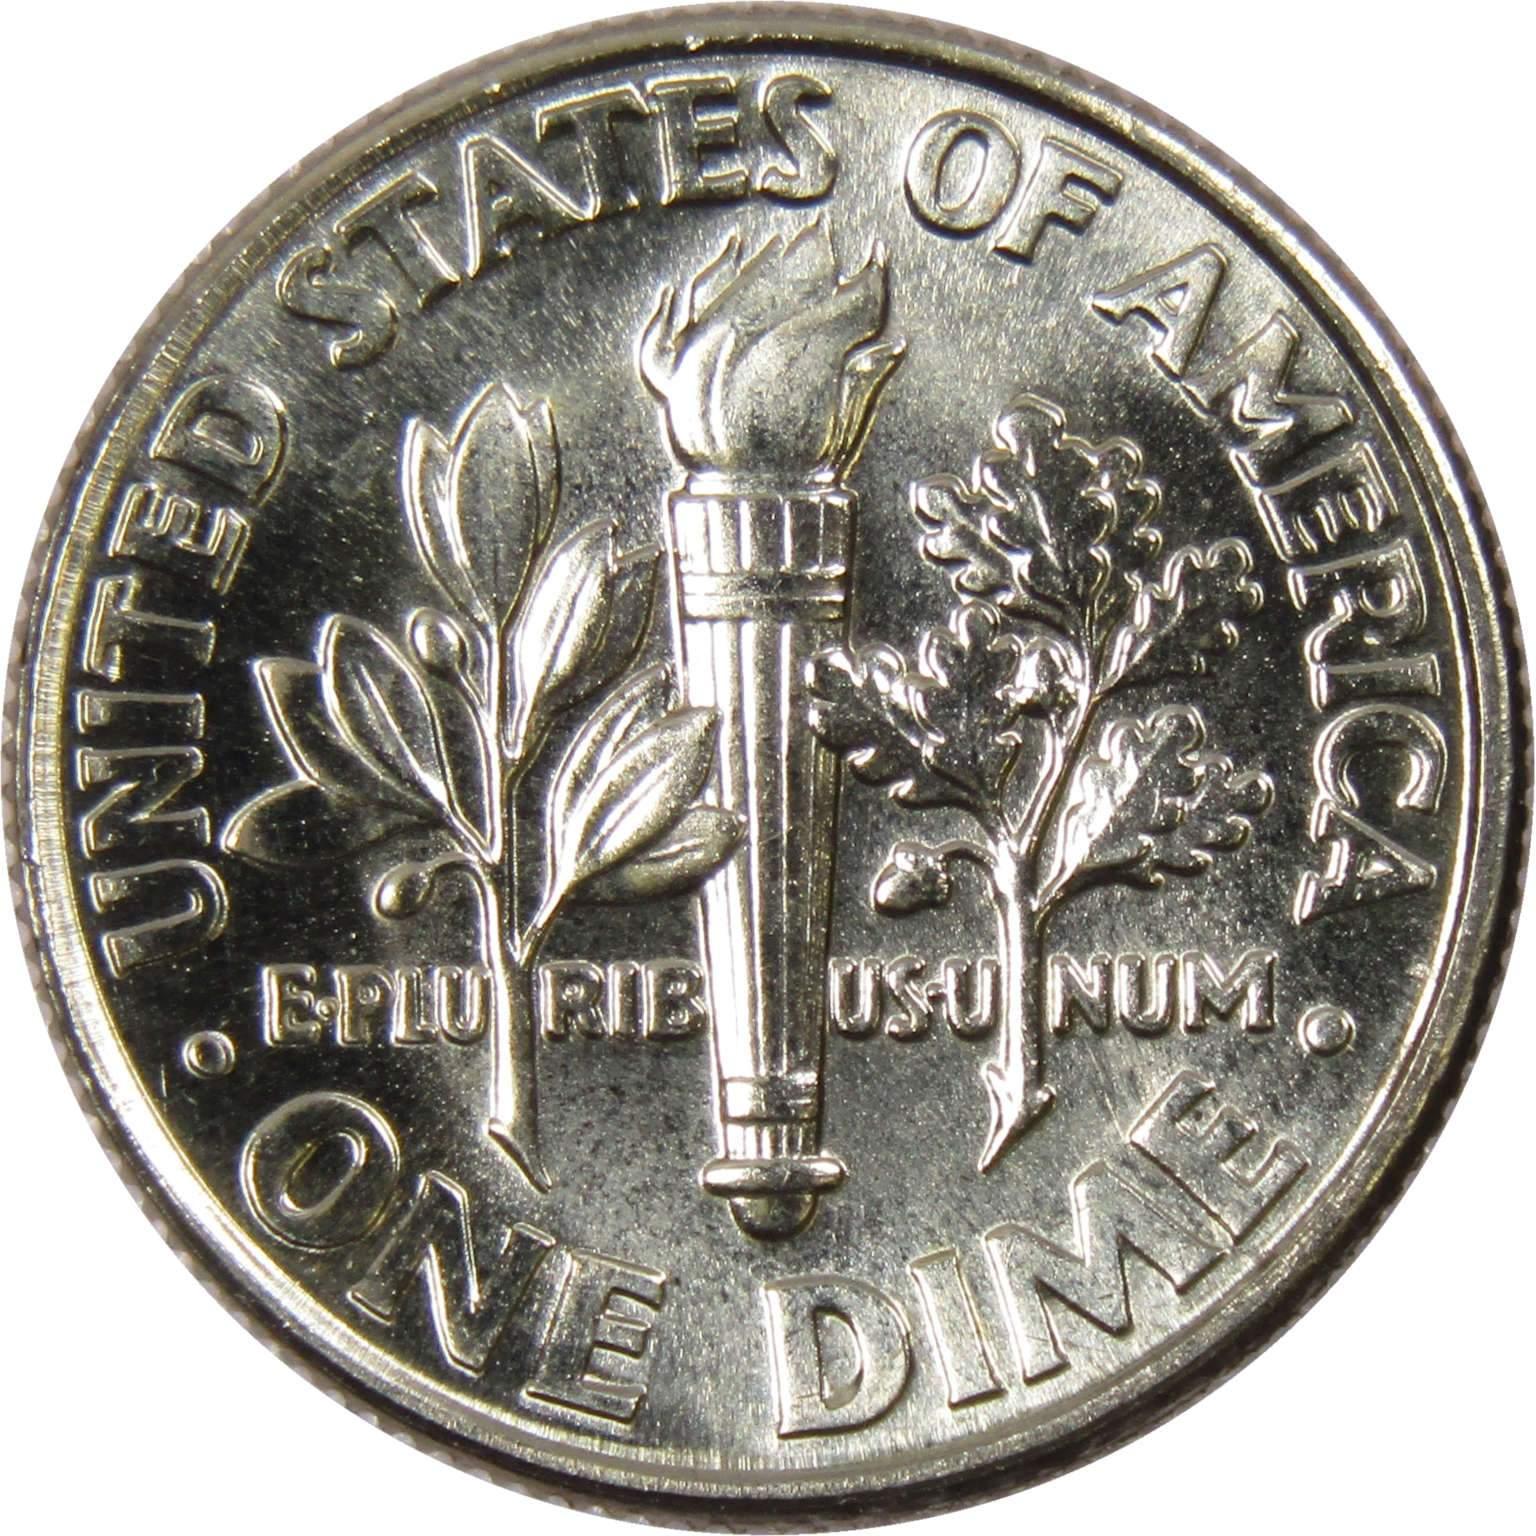 1997 D Roosevelt Dime BU Uncirculated Mint State 10c US Coin Collectible